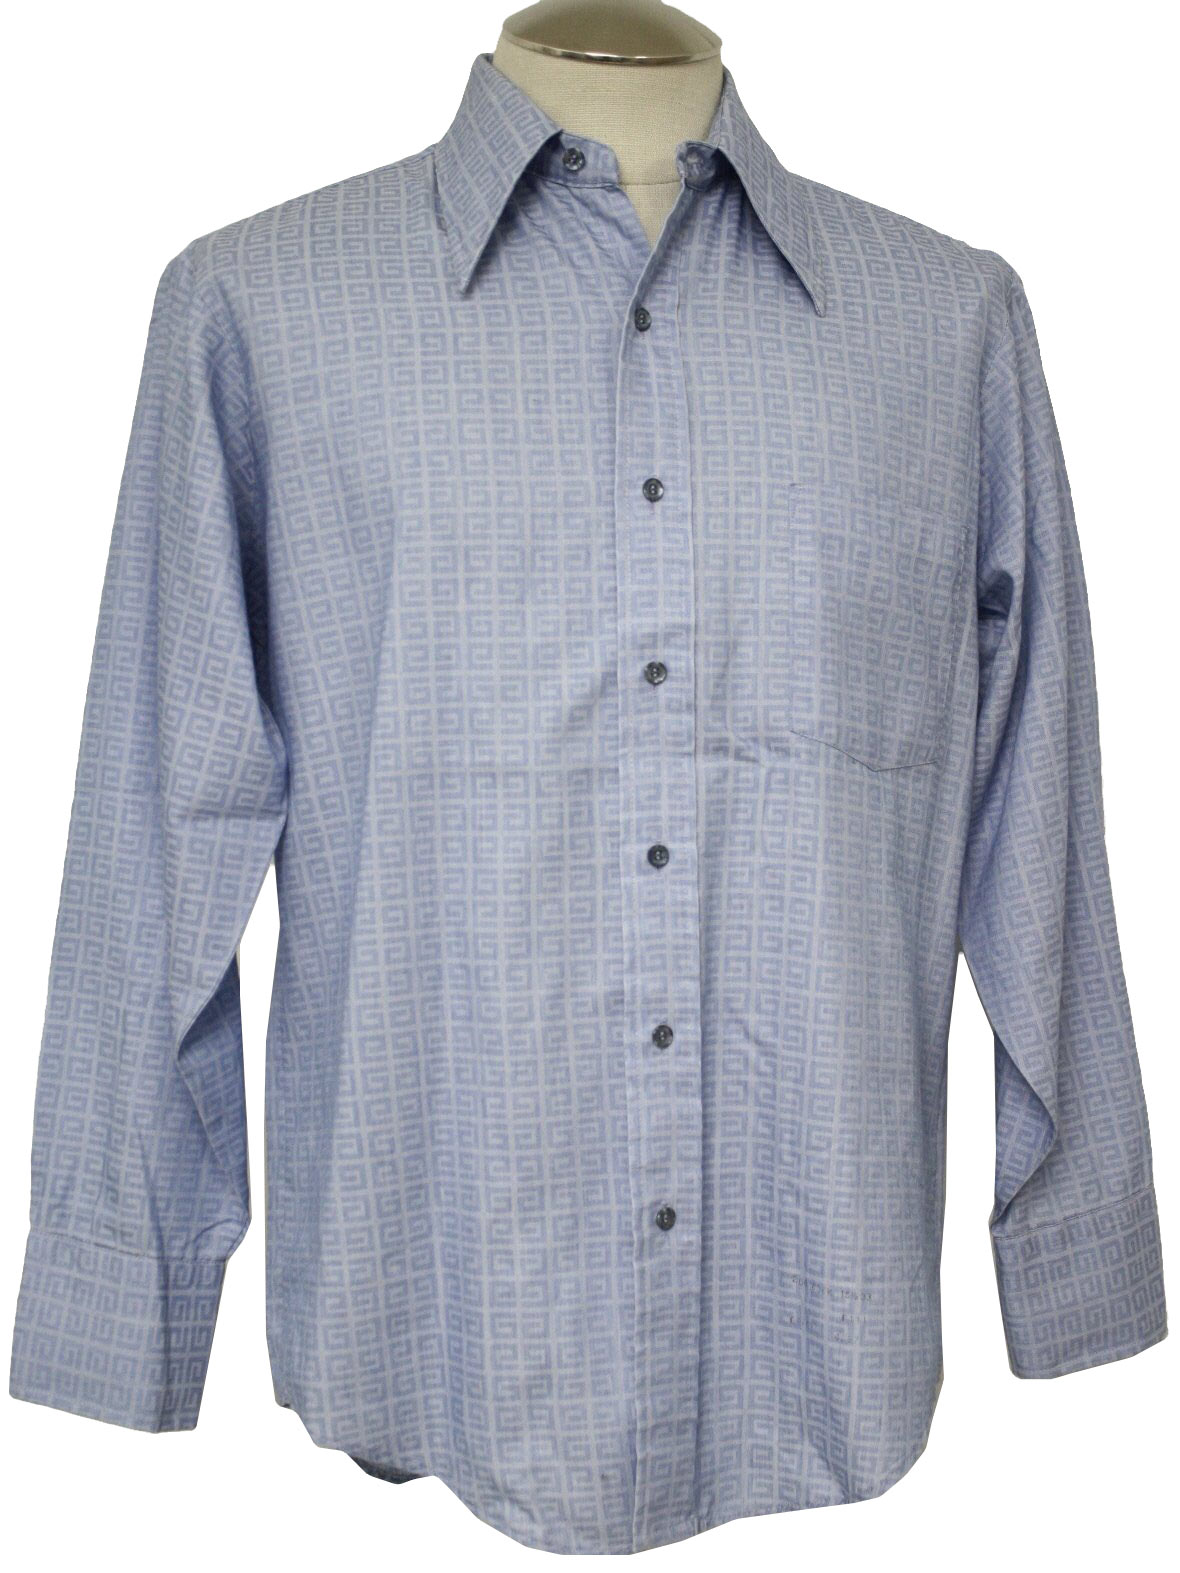 Retro 1970's Shirt (Towncraft) : 70s -Towncraft- Mens shades of blue ...